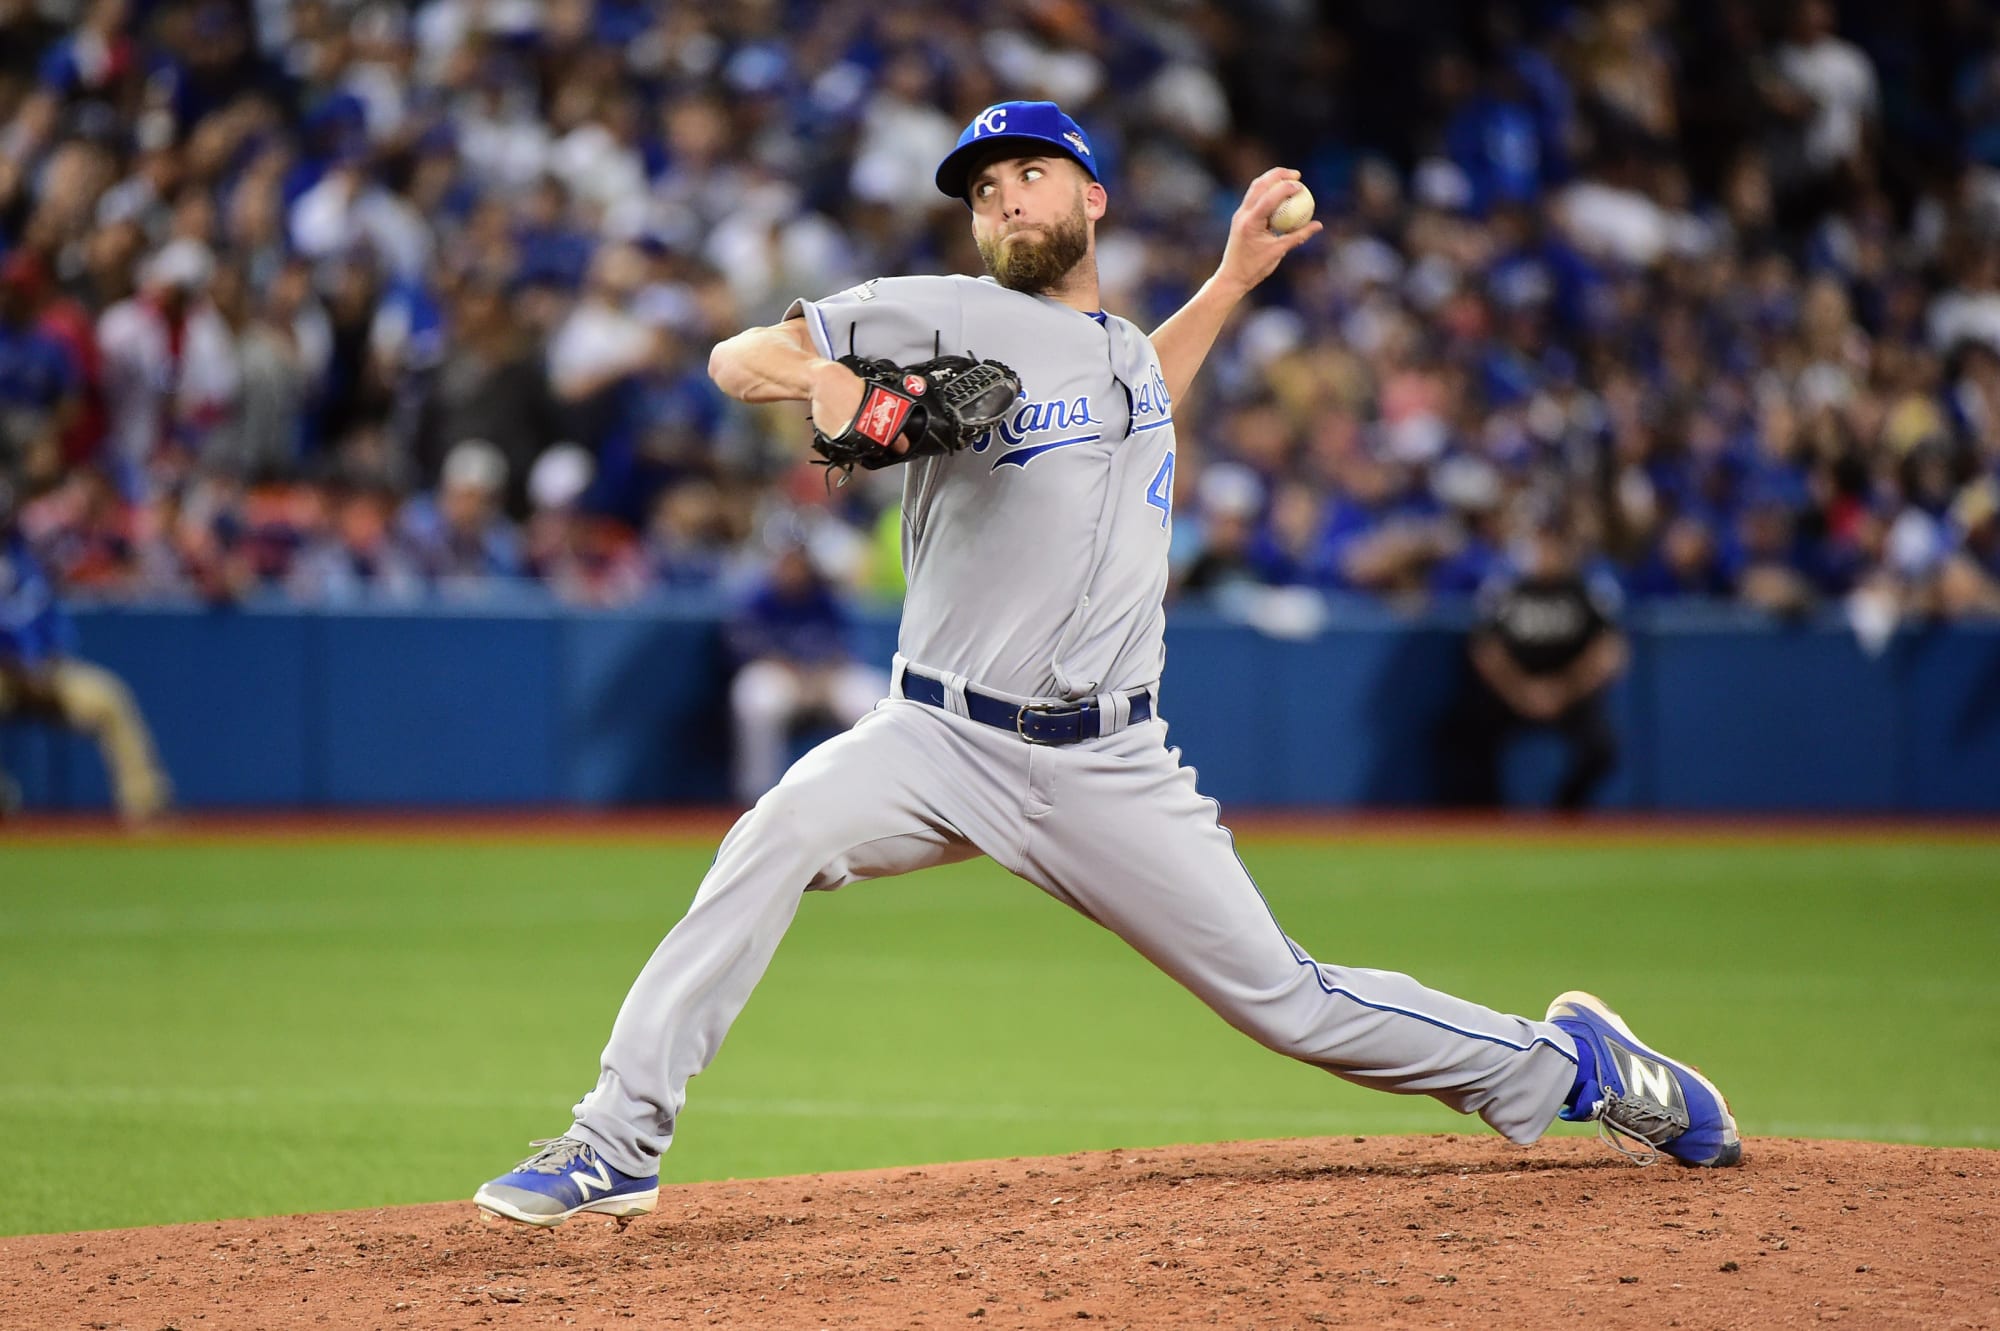 The KC Royals were unable to keep up in season opener